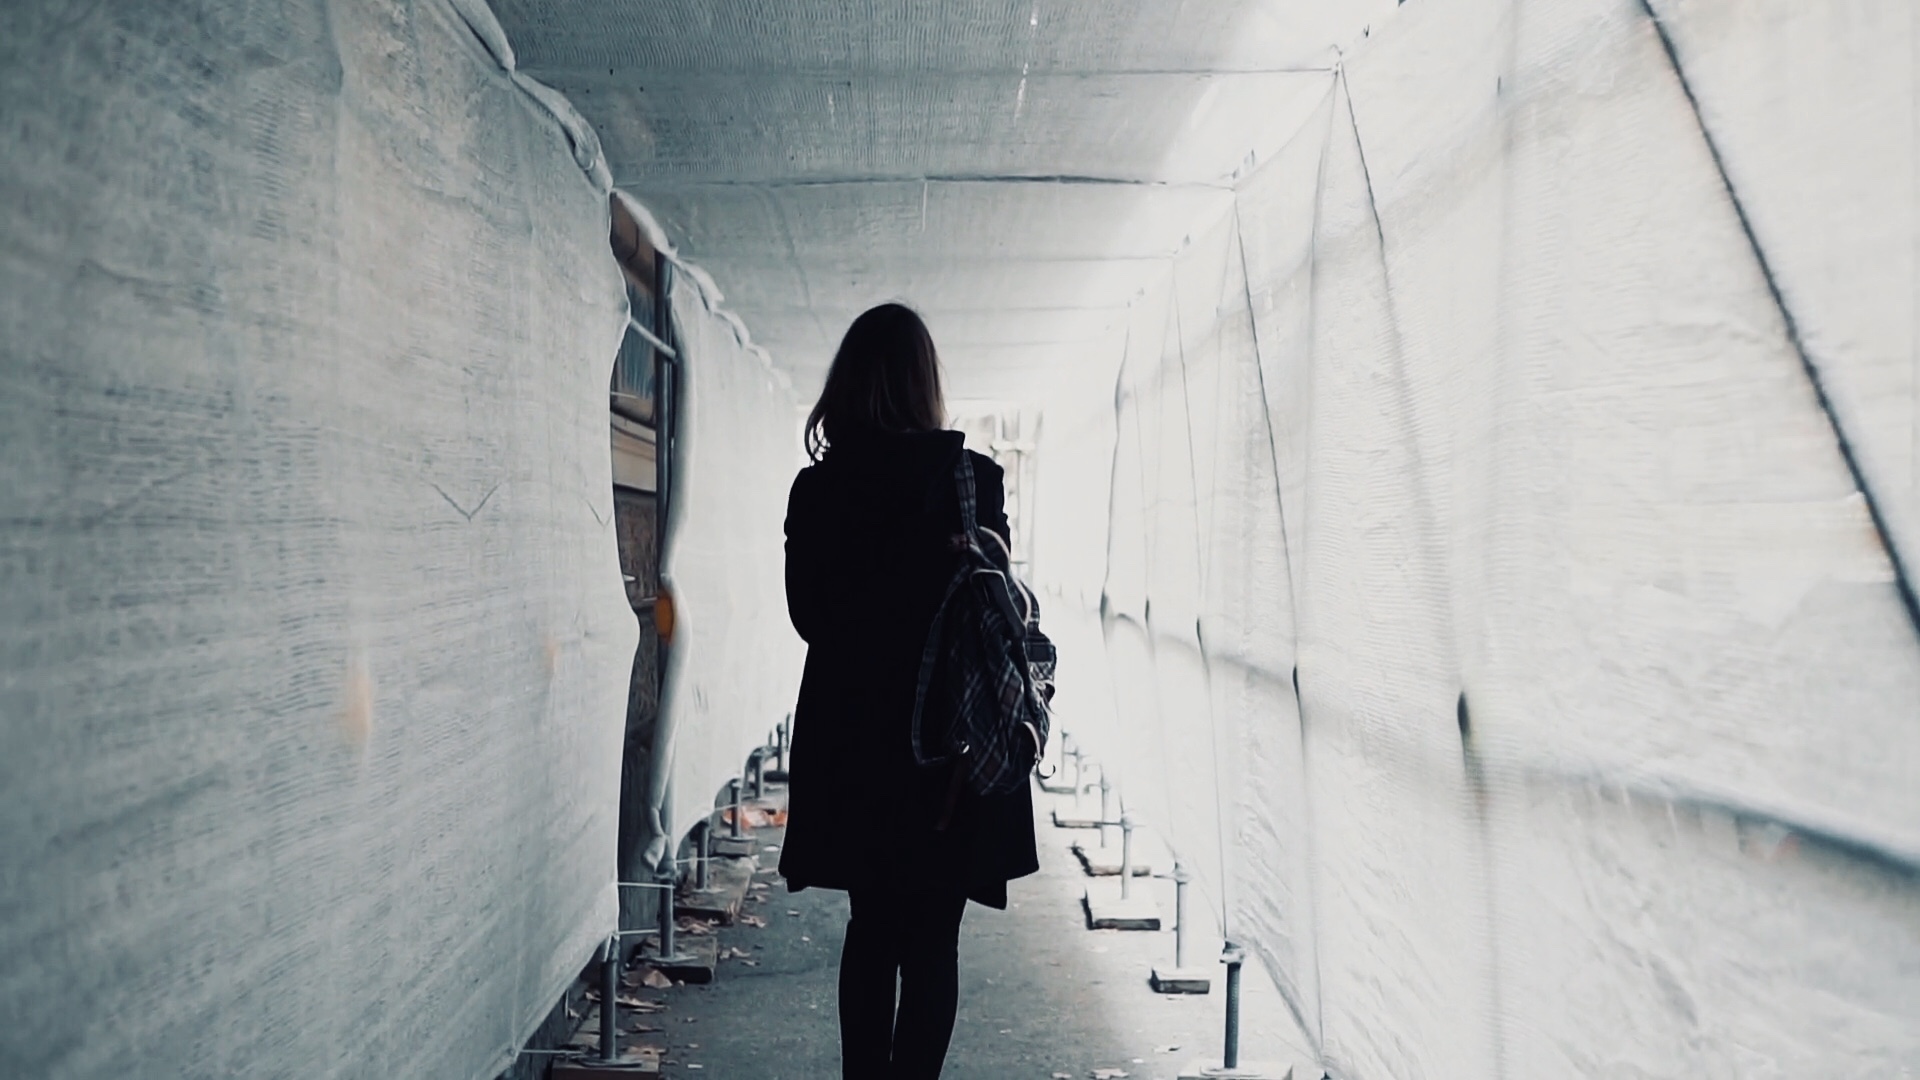 videoblocks-student-girl-walking-through-the-white-construction-corridor-back-view-of-young-woman-goes-to-work-across-the-building_rnllt3ldje_thumbnail-full08.jpg